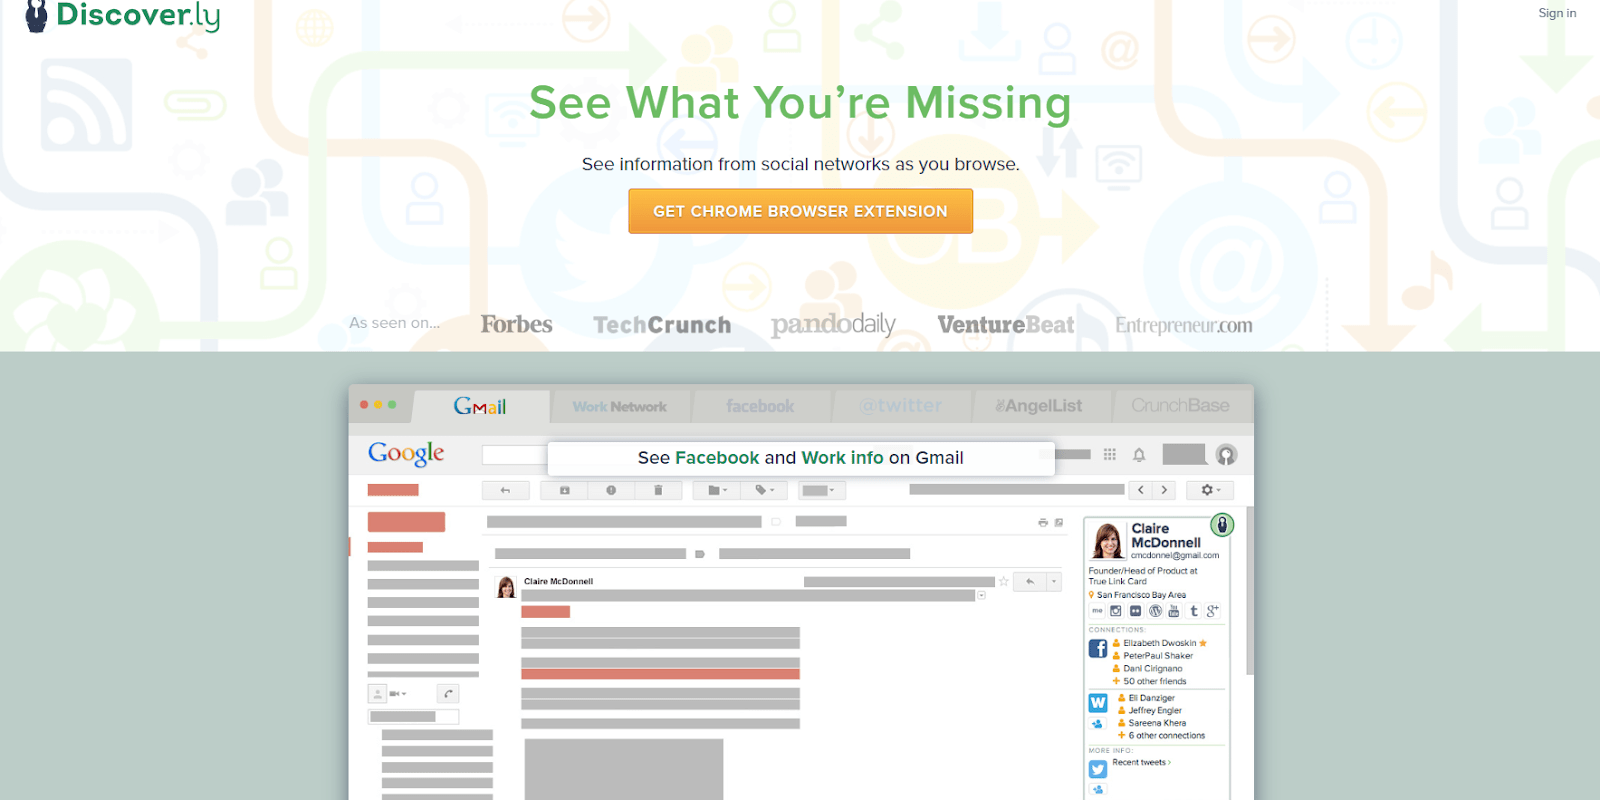 Best Free Email Finder Tools:- Discover.ly